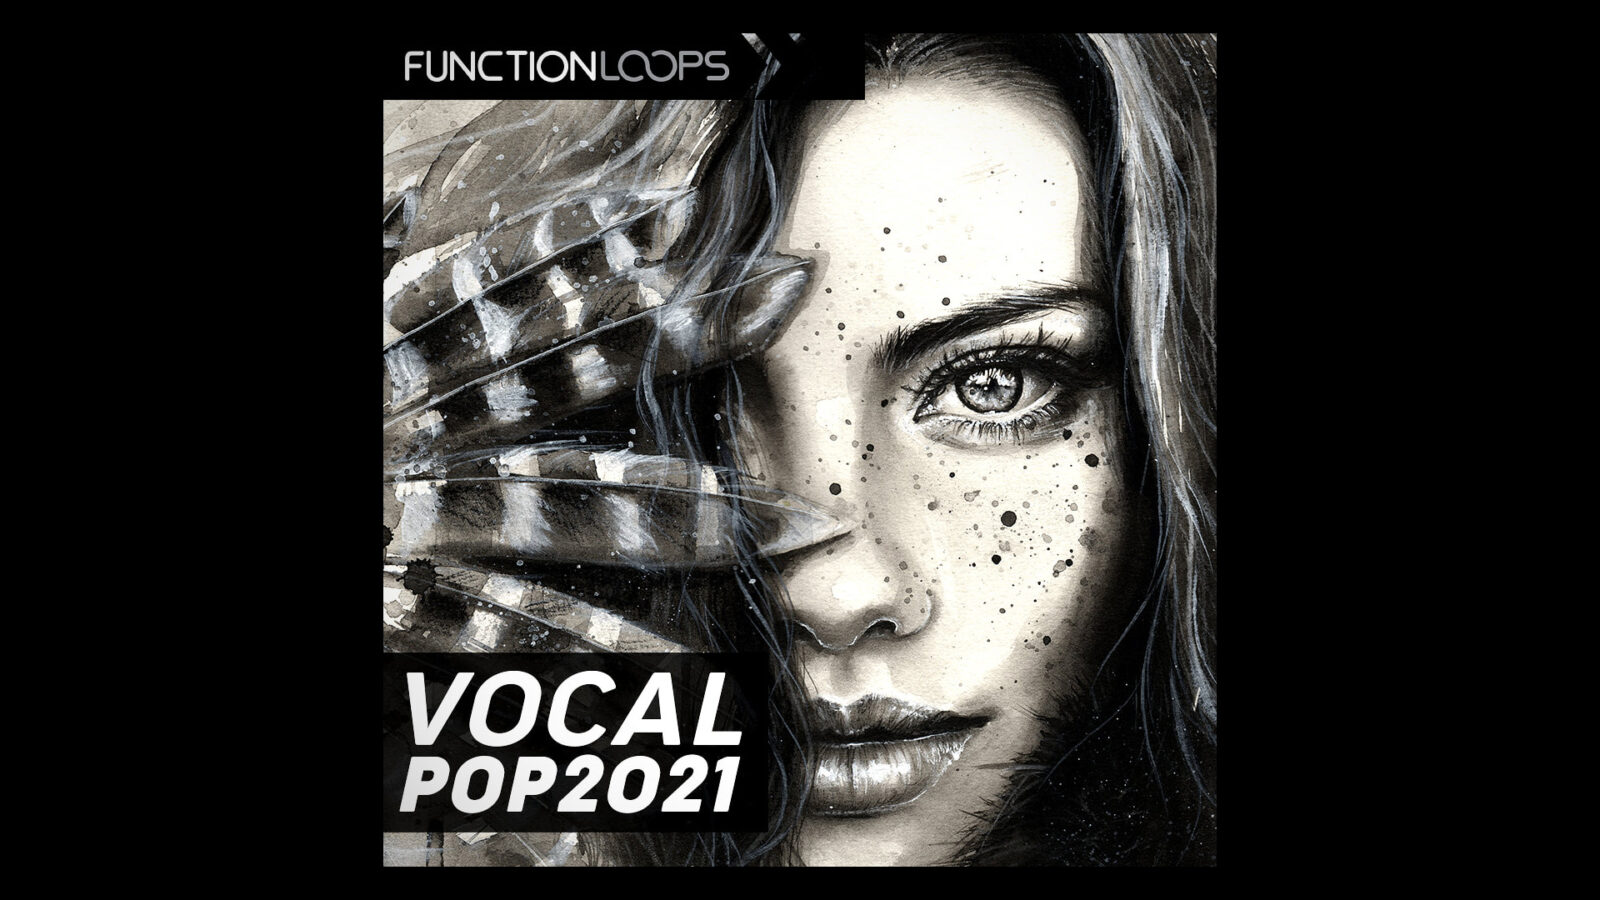 Vocal Pop 2021 Sample Pack Is Now Free!